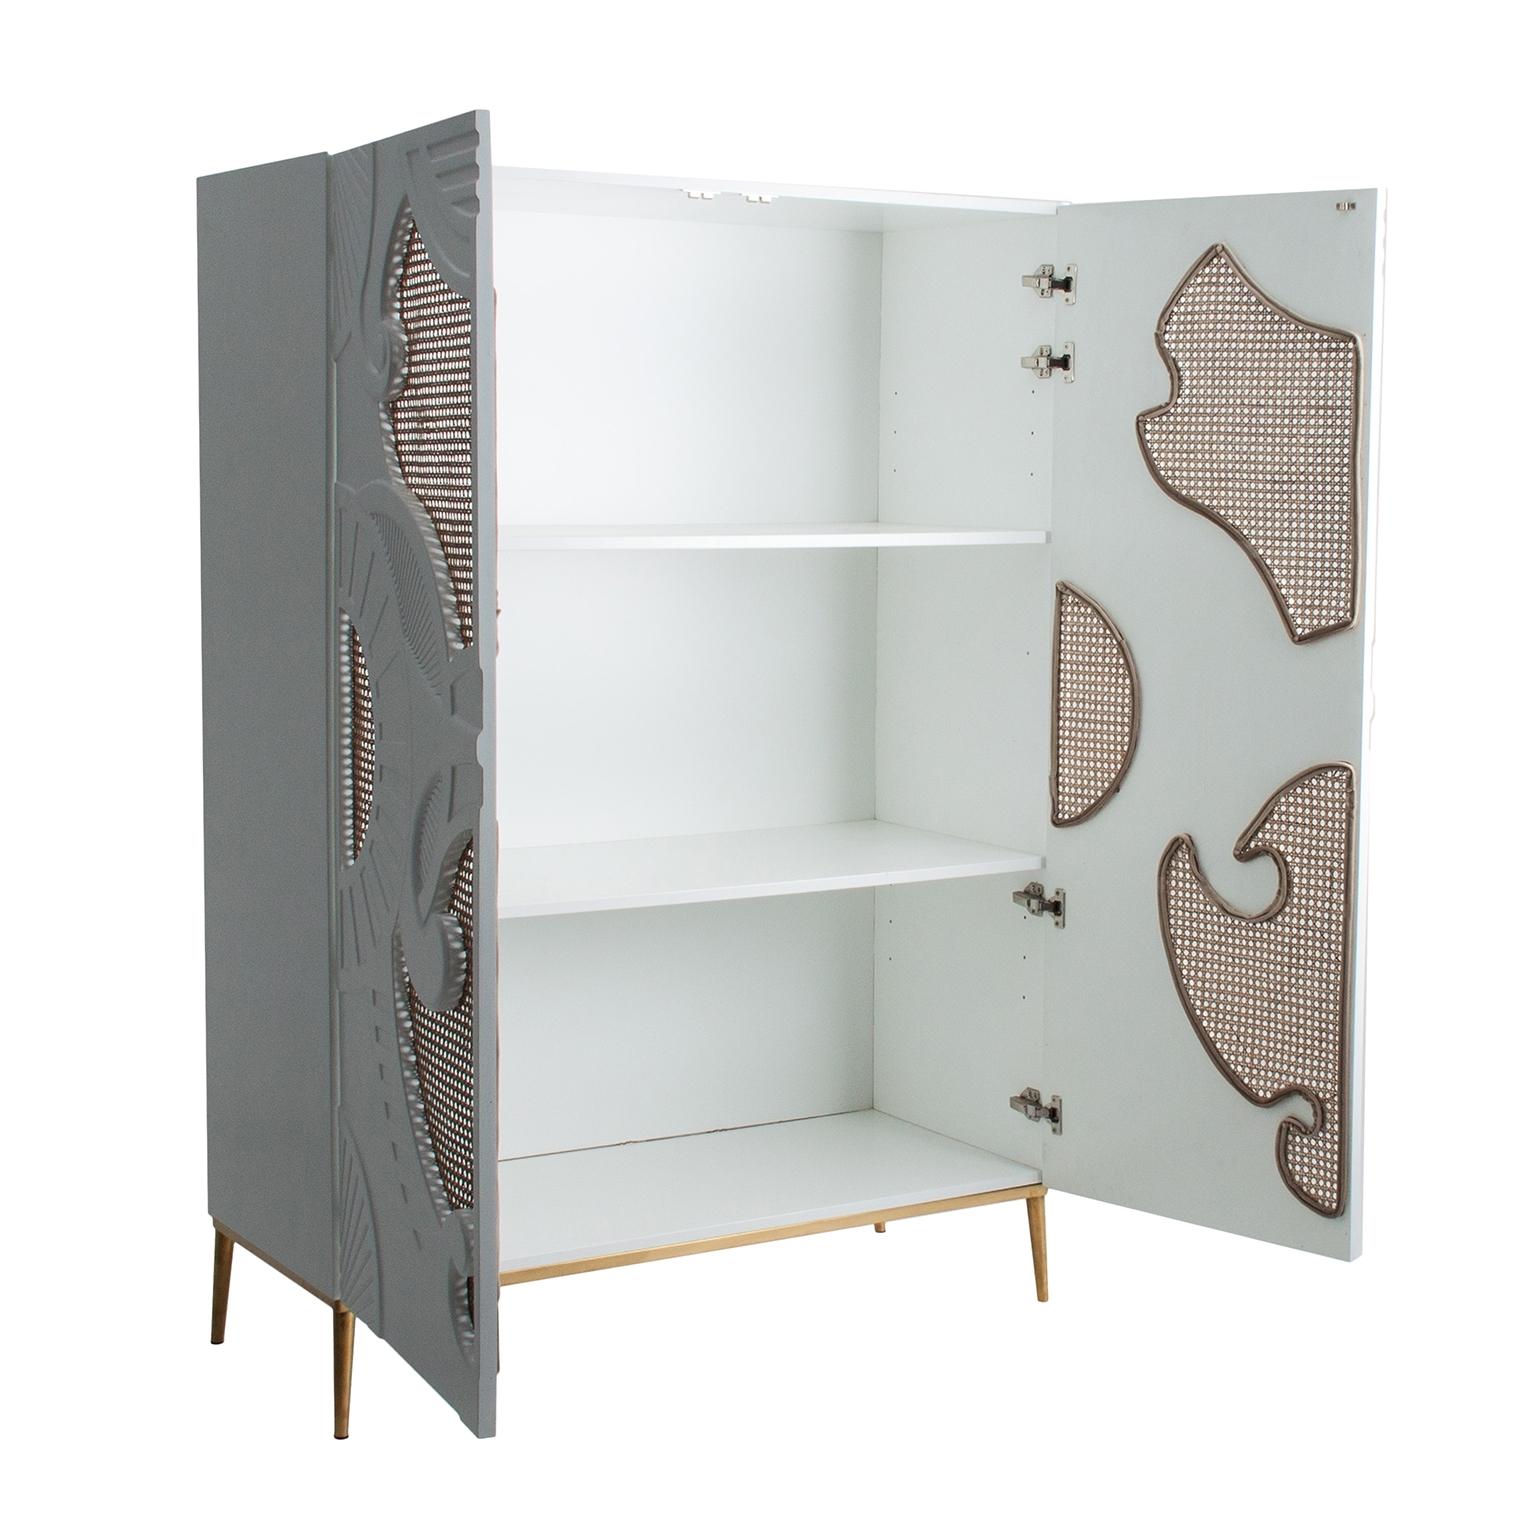 White lacquer wooden with woven cane and graphic panels doors cabinet.